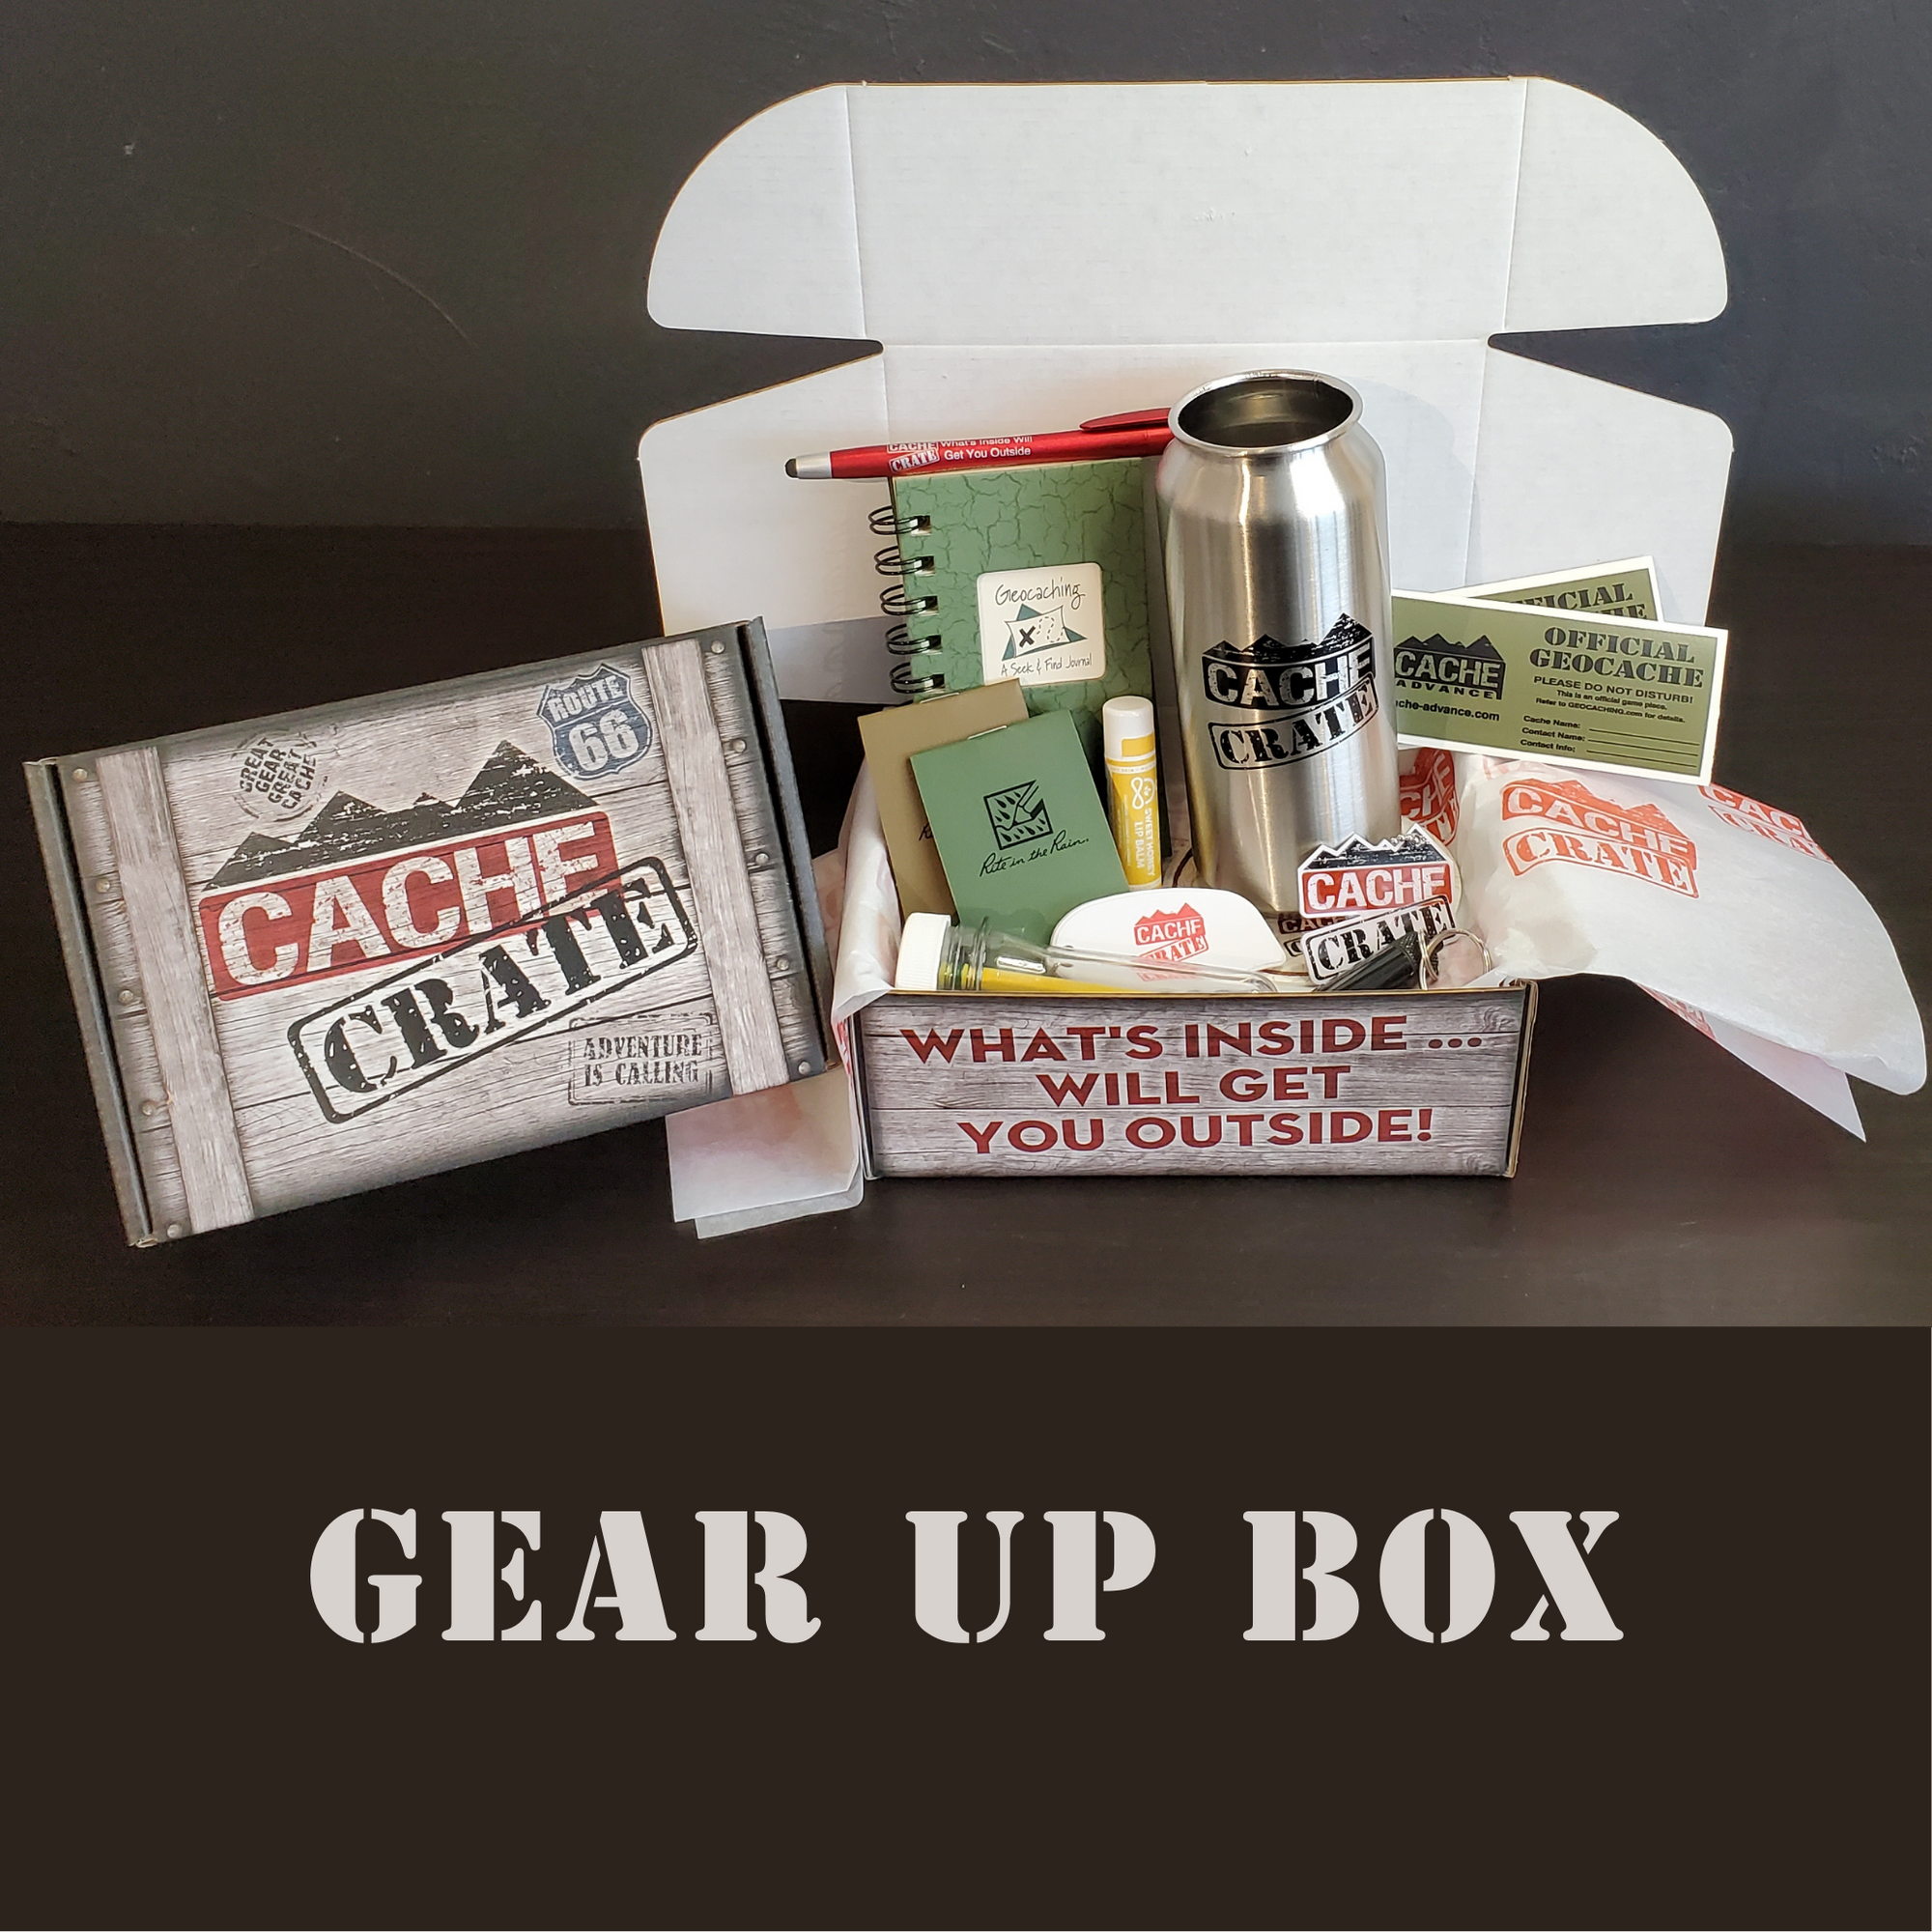 Action Figure Barbecue: Geocaching Review: Micro Ammo Can Geocache Container  by Groundspeak, Inc.